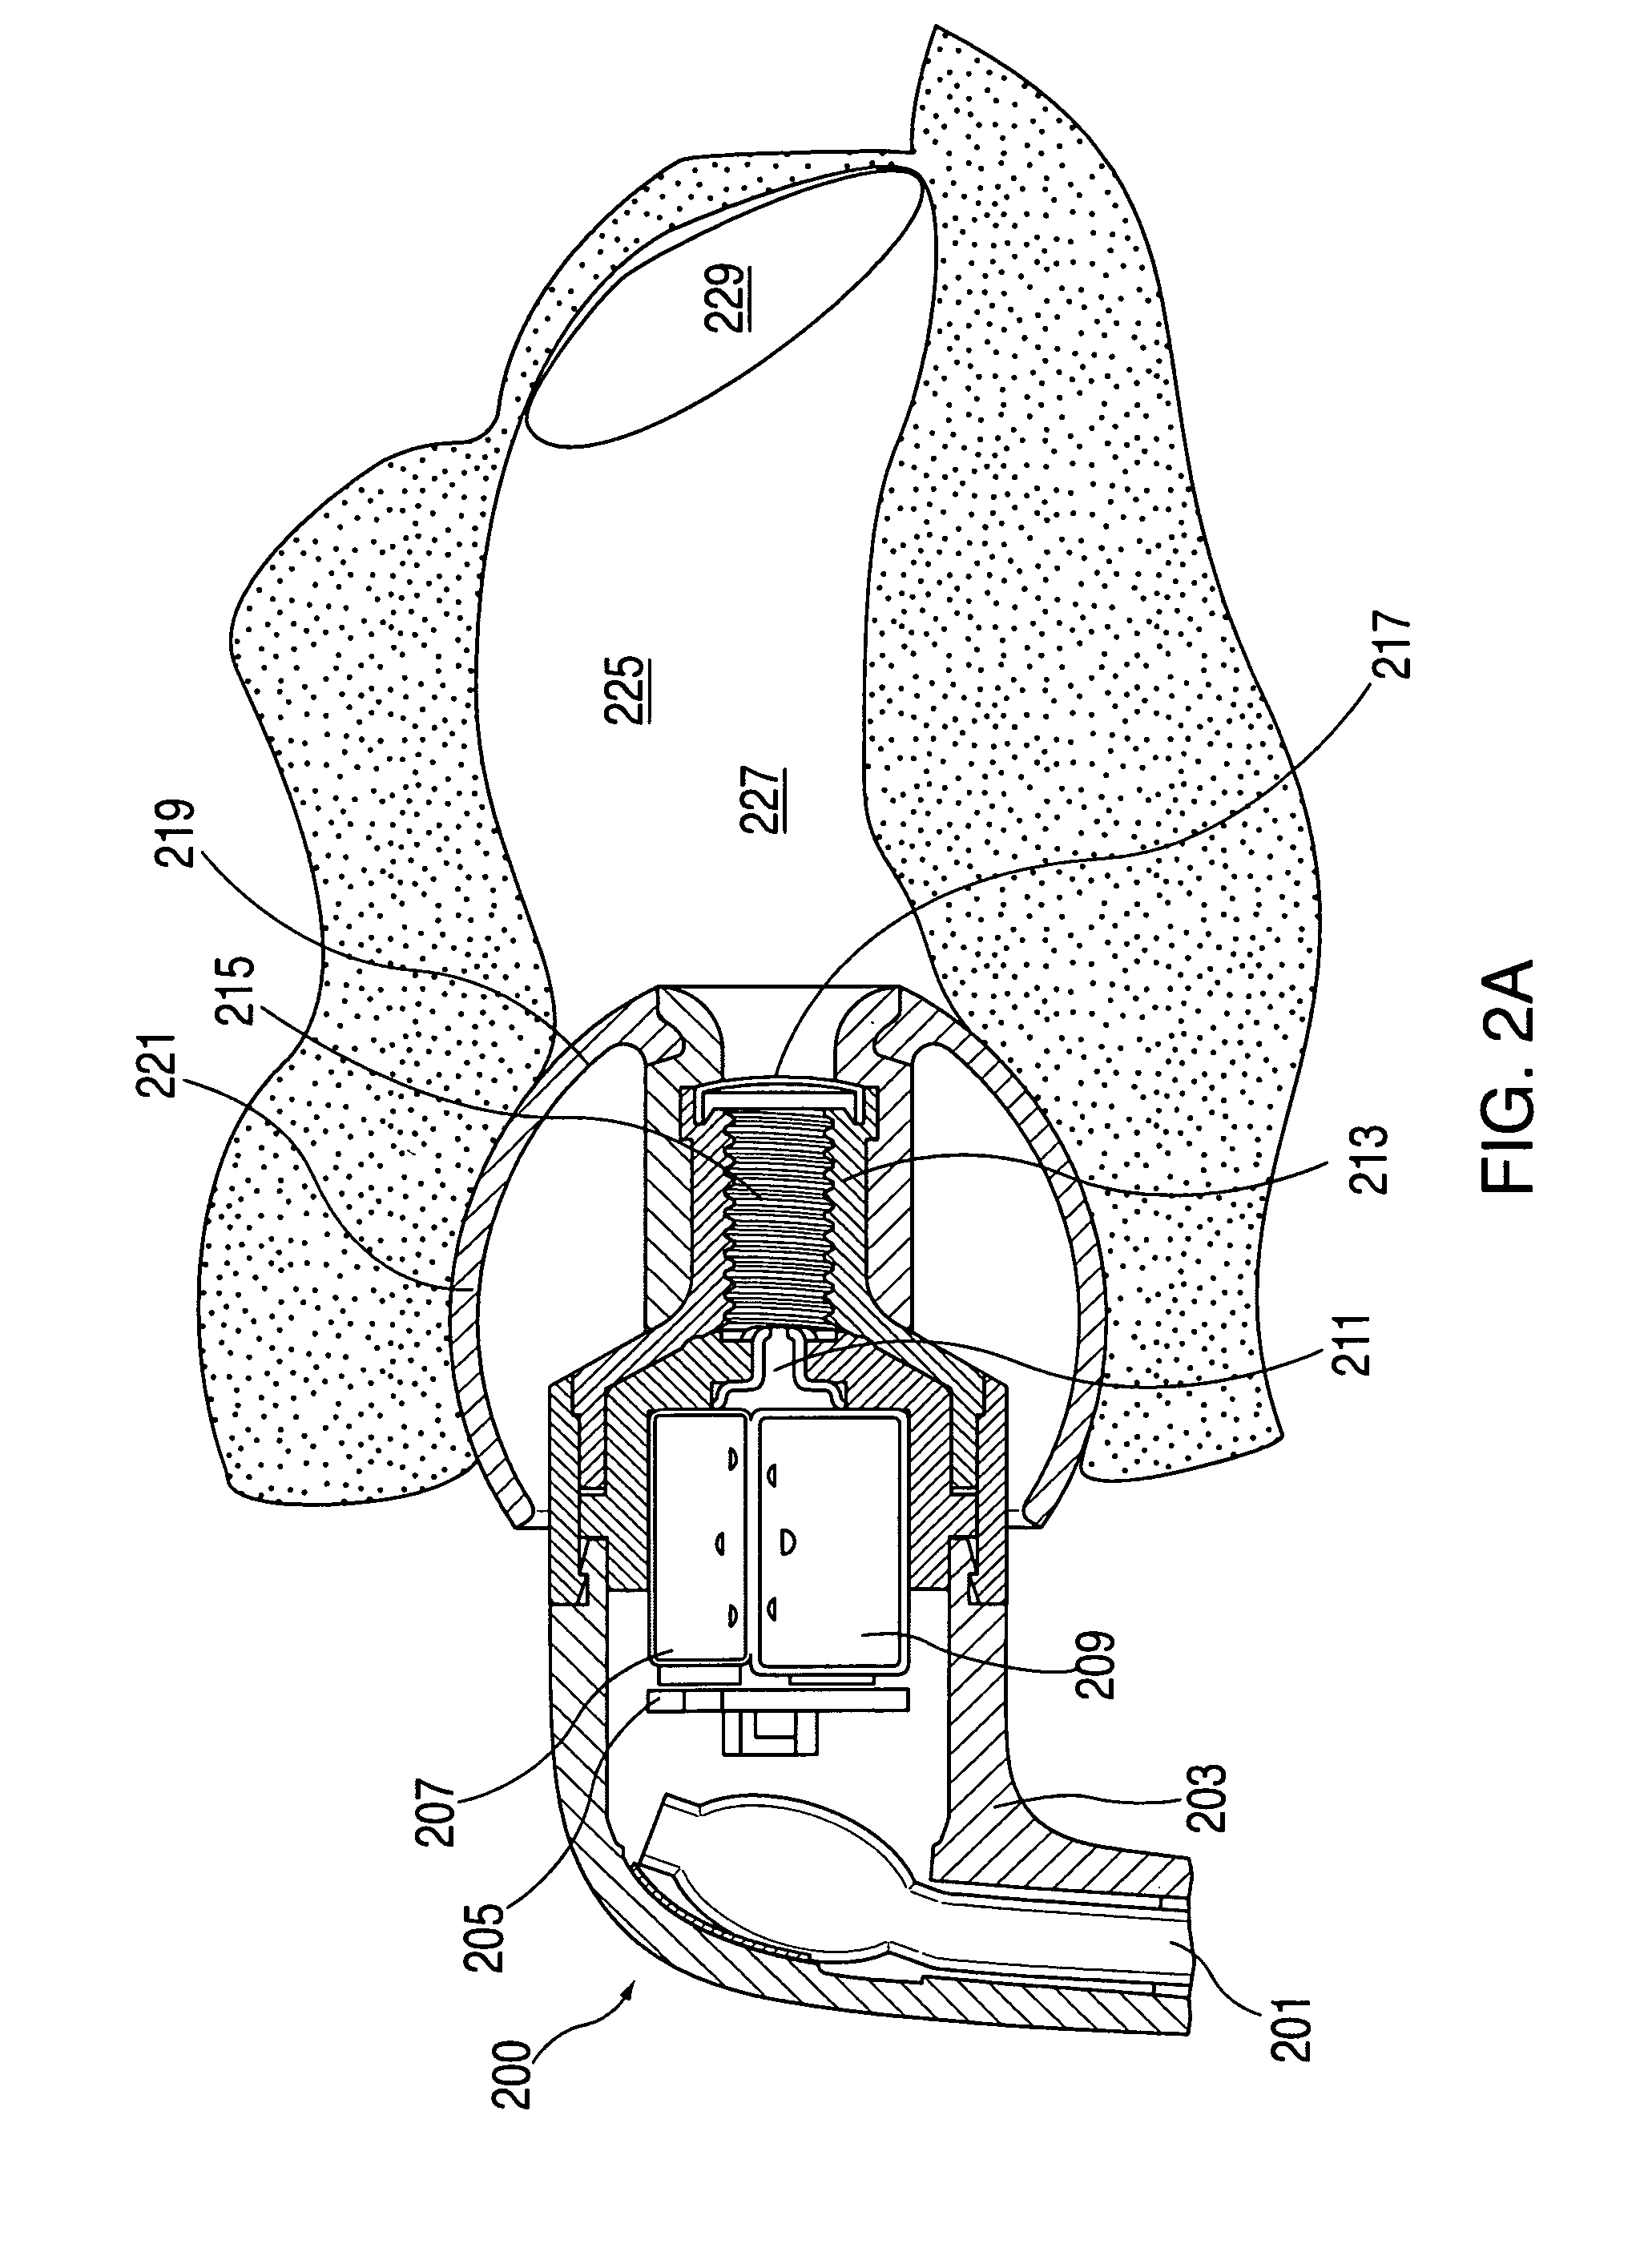 In-the-ear porting structures for earbud